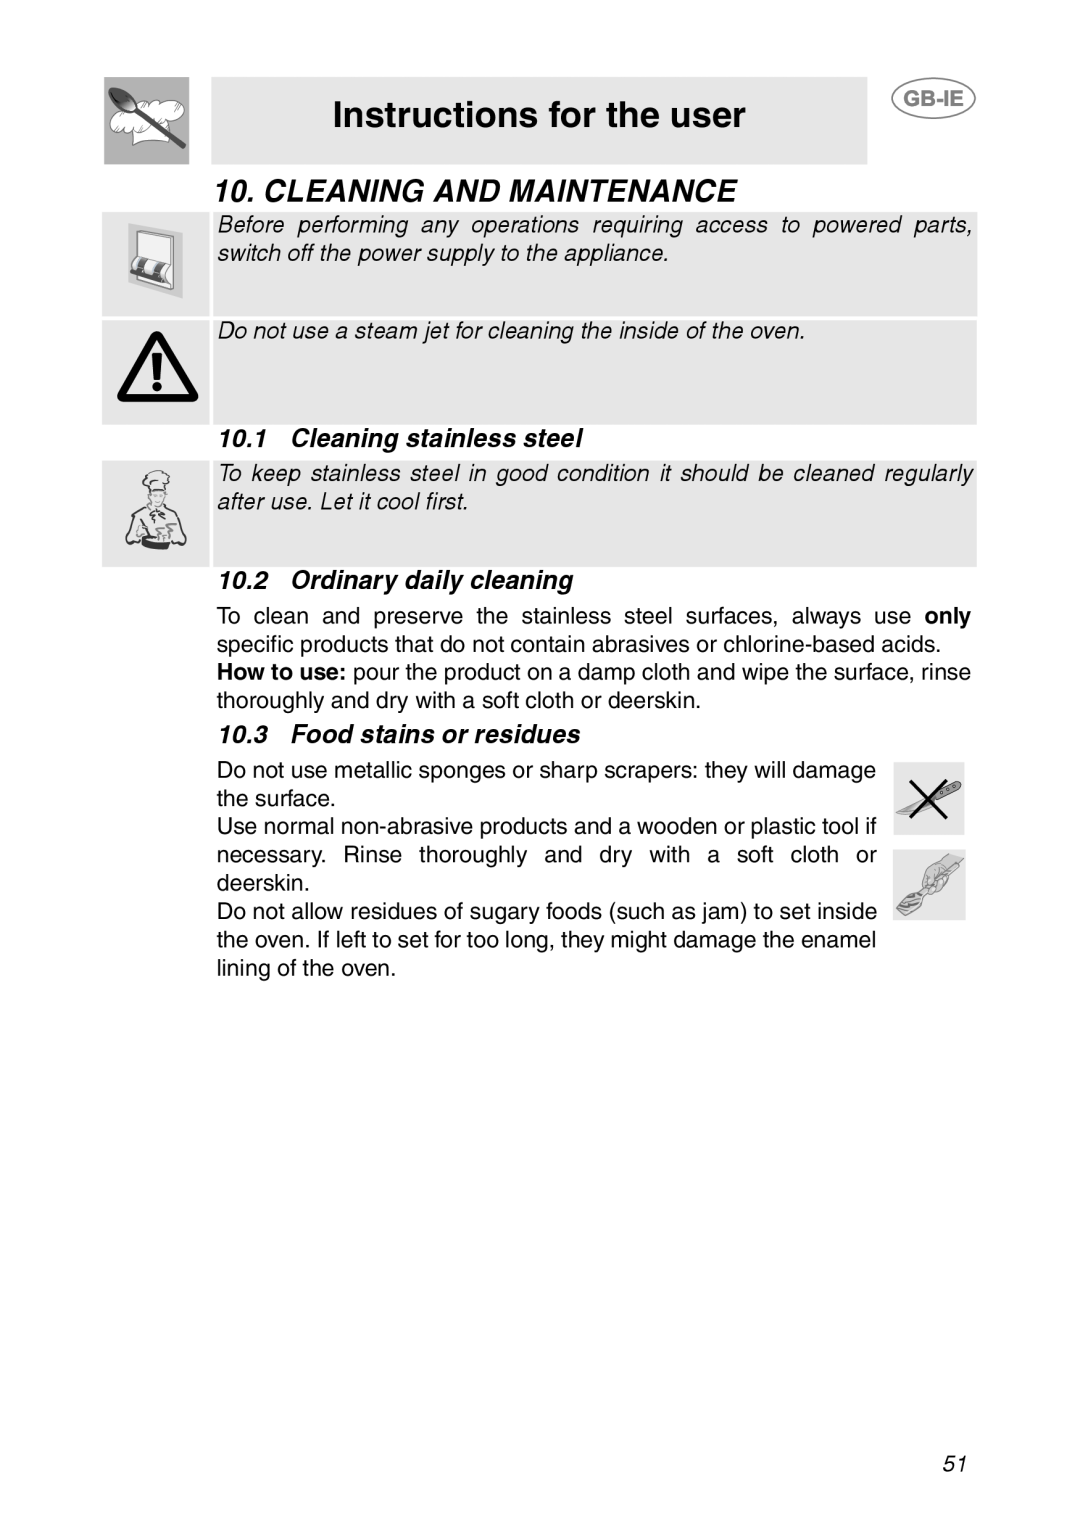 Smeg FP131B1 manual Cleaning And Maintenance, Instructions for the user, Cleaning stainless steel, Ordinary daily cleaning 